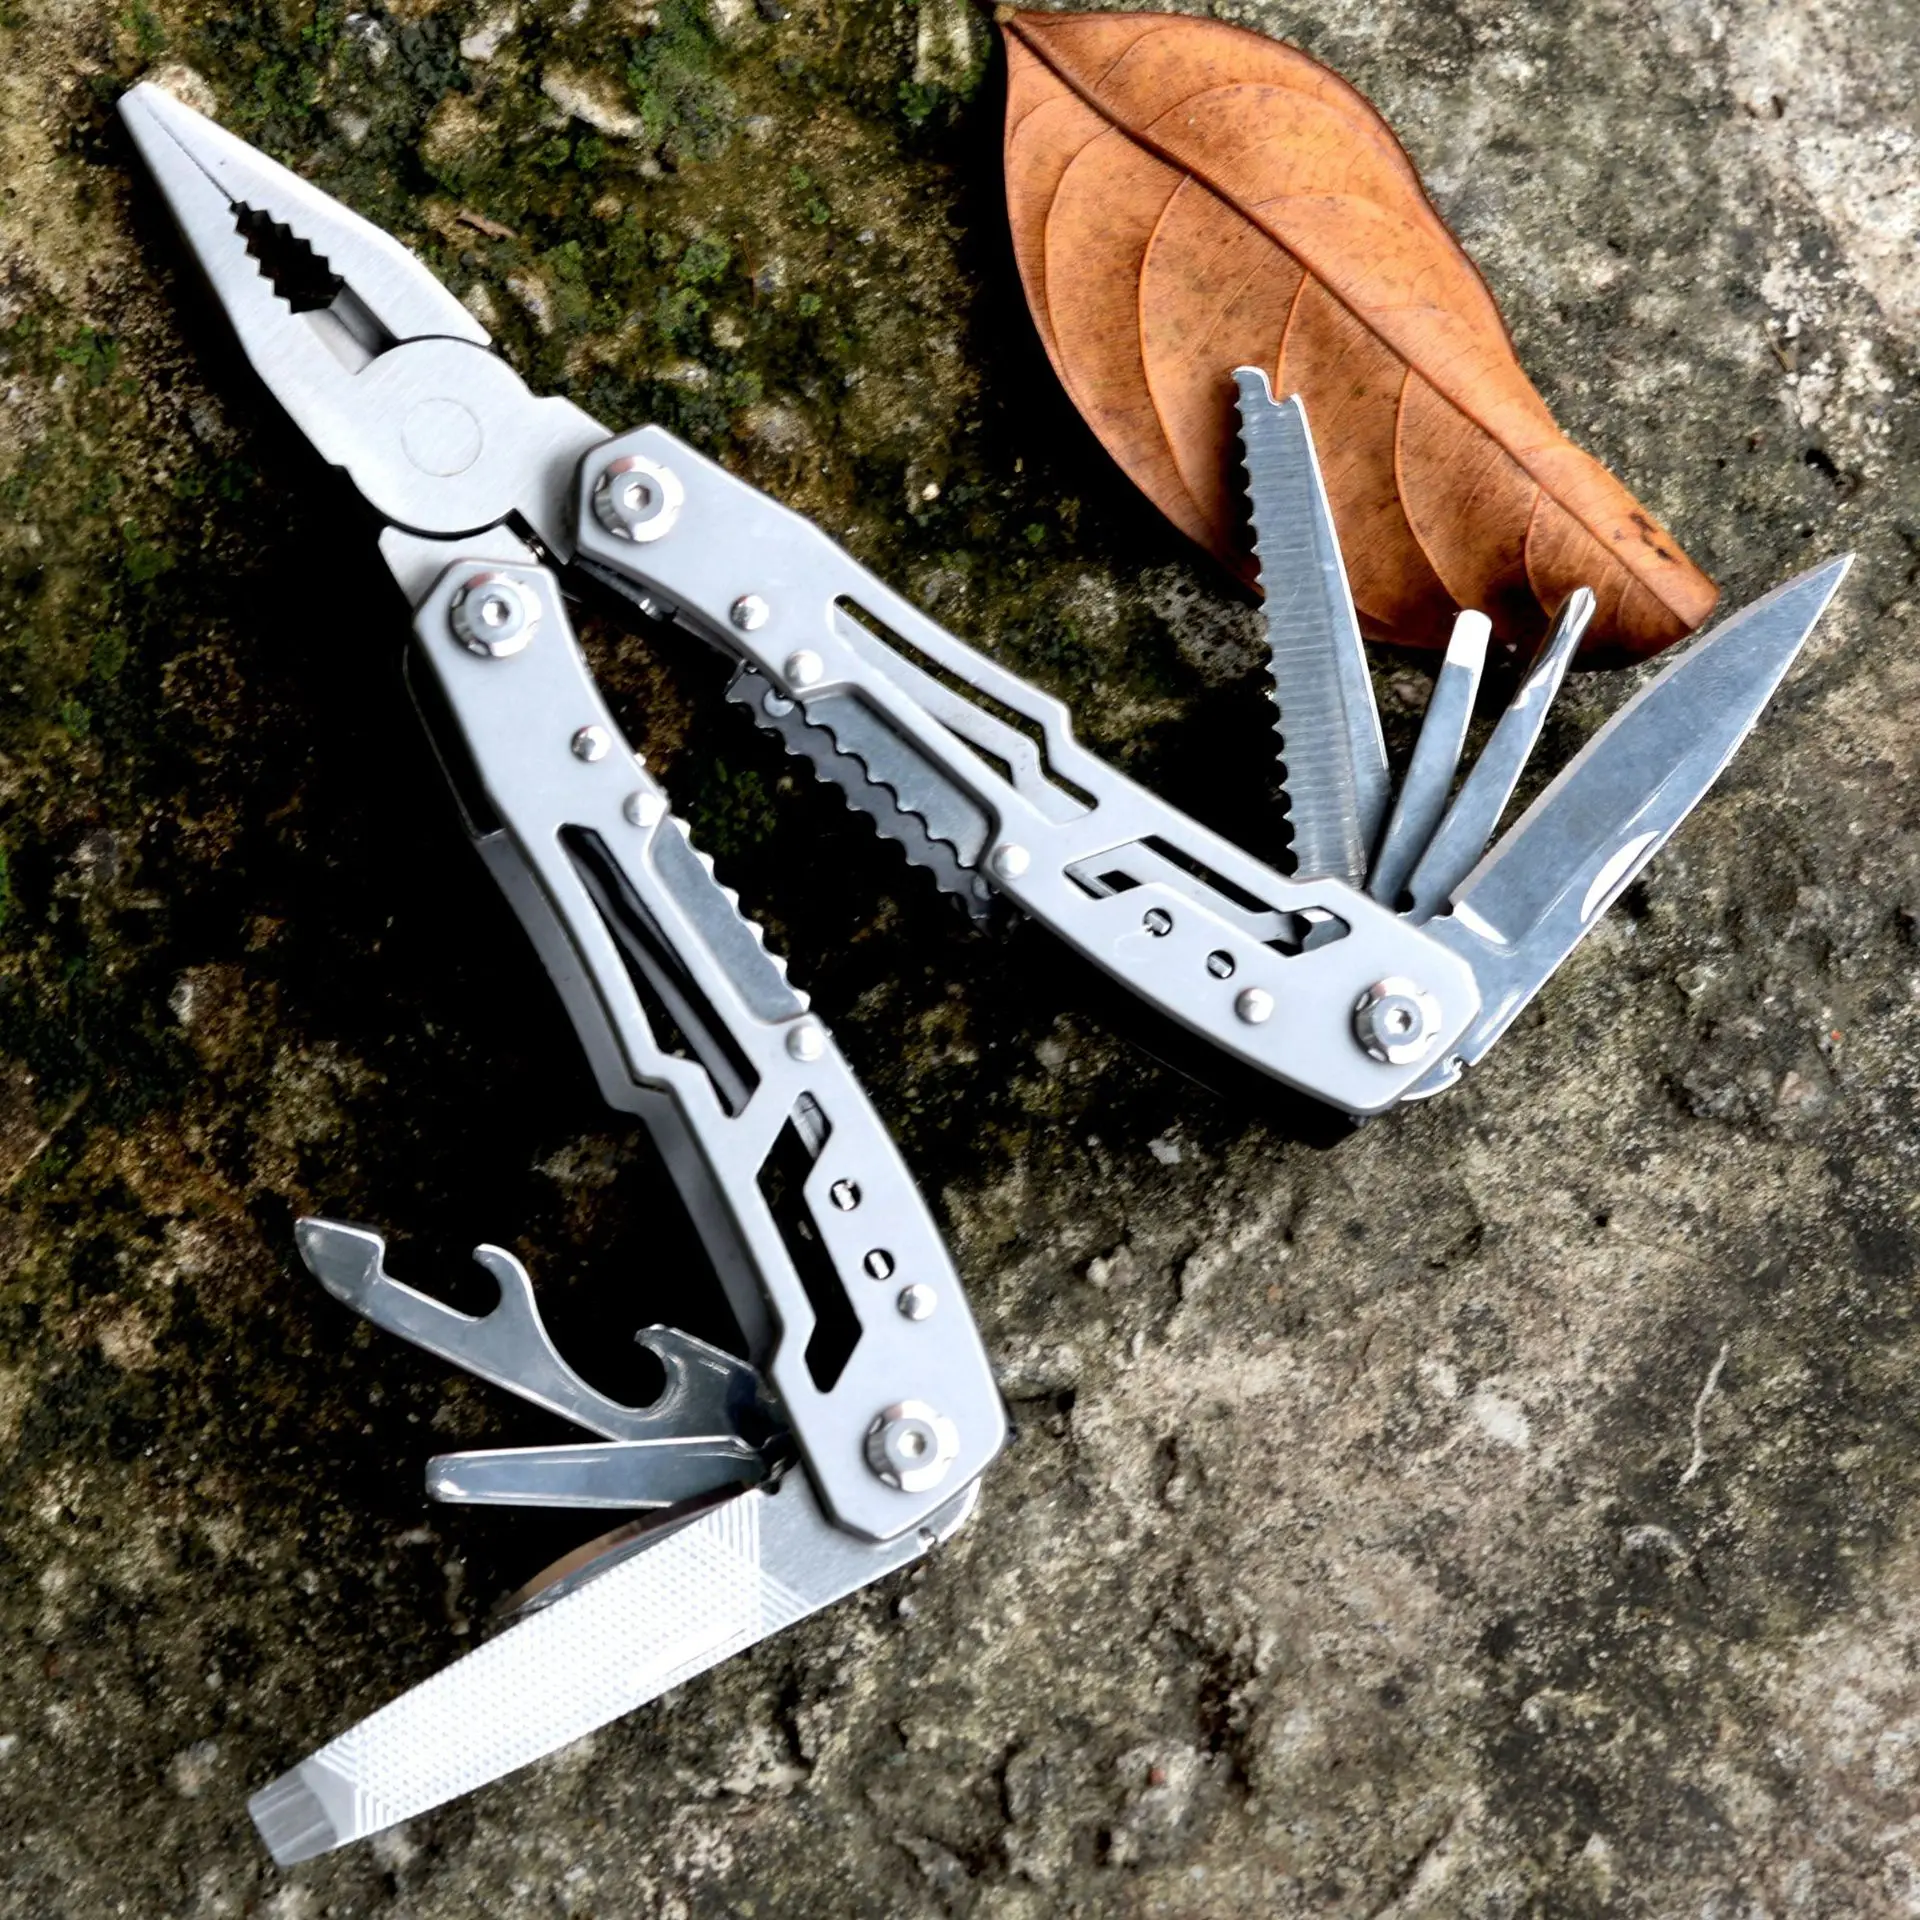 Multifunction Folding Pliers Pocket Knife Outdoor Camping Survival Hunting - £9.49 GBP+